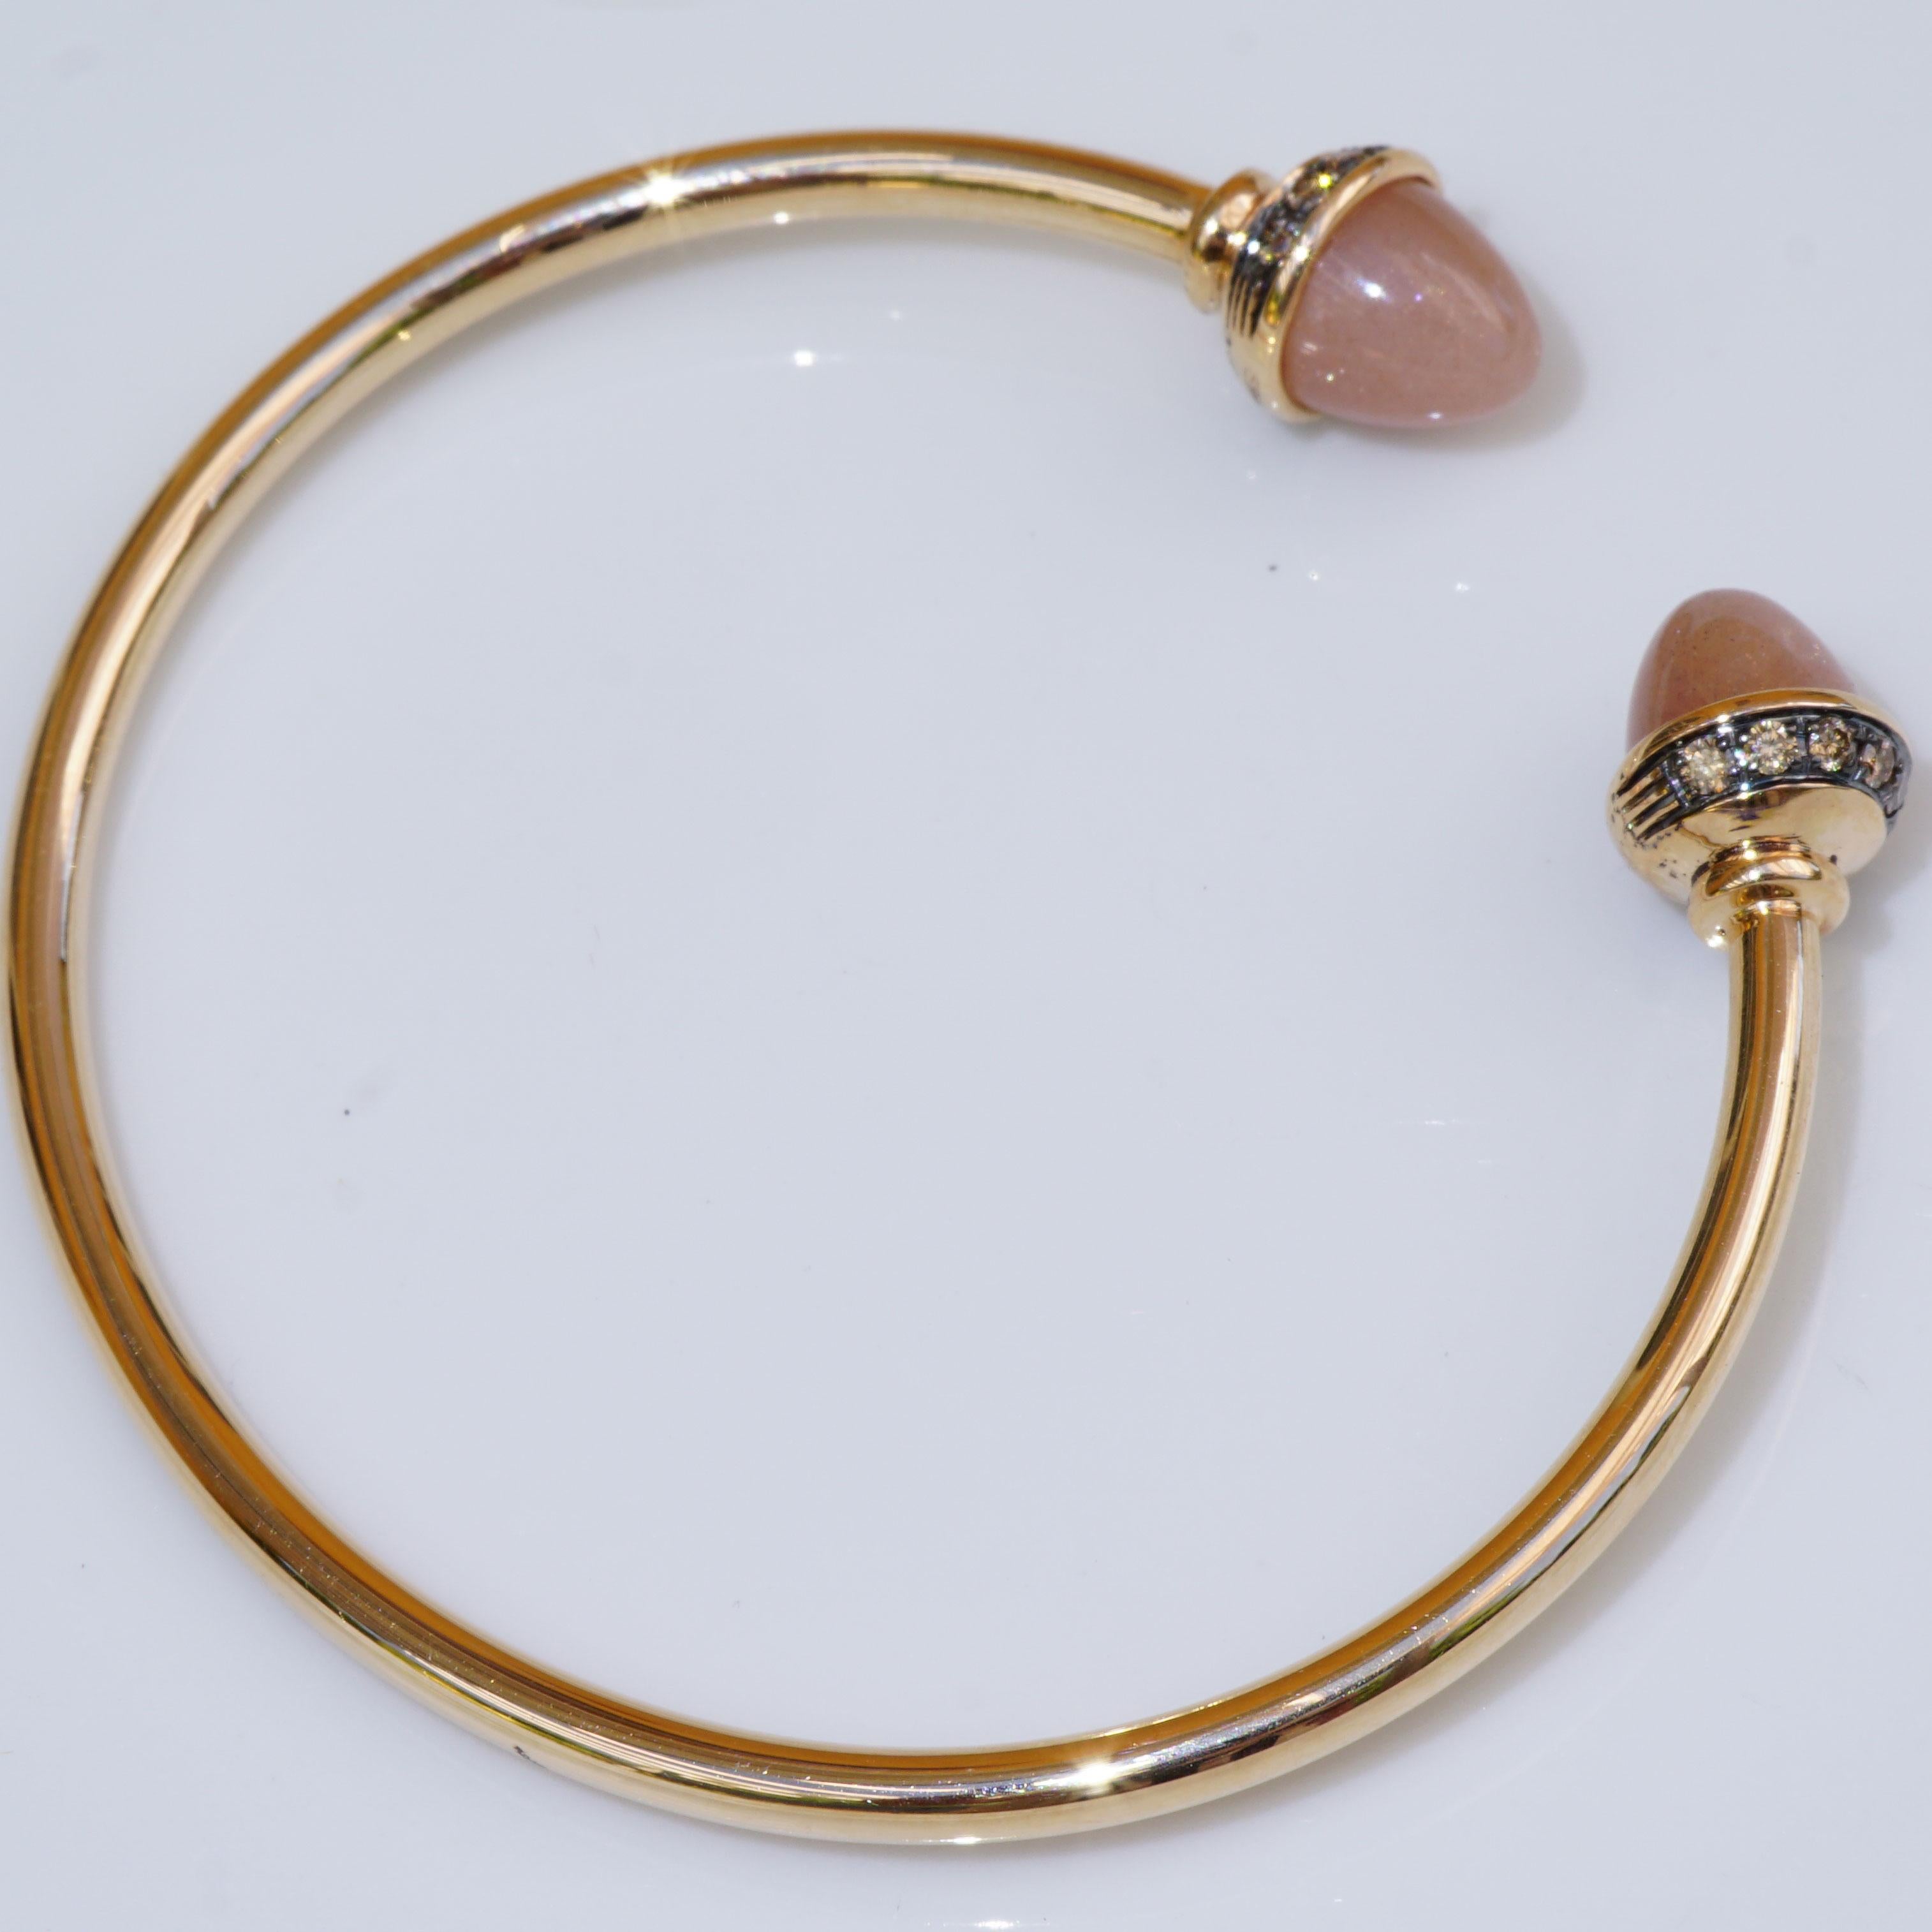 bangle with rose-colored moonstone cone with a total of approx. 5.80 ct, 8 mm diameter, opaque fine Color quality, made of 750 rose gold, setting set with matching light brown full-cut brilliant-cut diamonds total approx. 0.32 ct, VS, inside